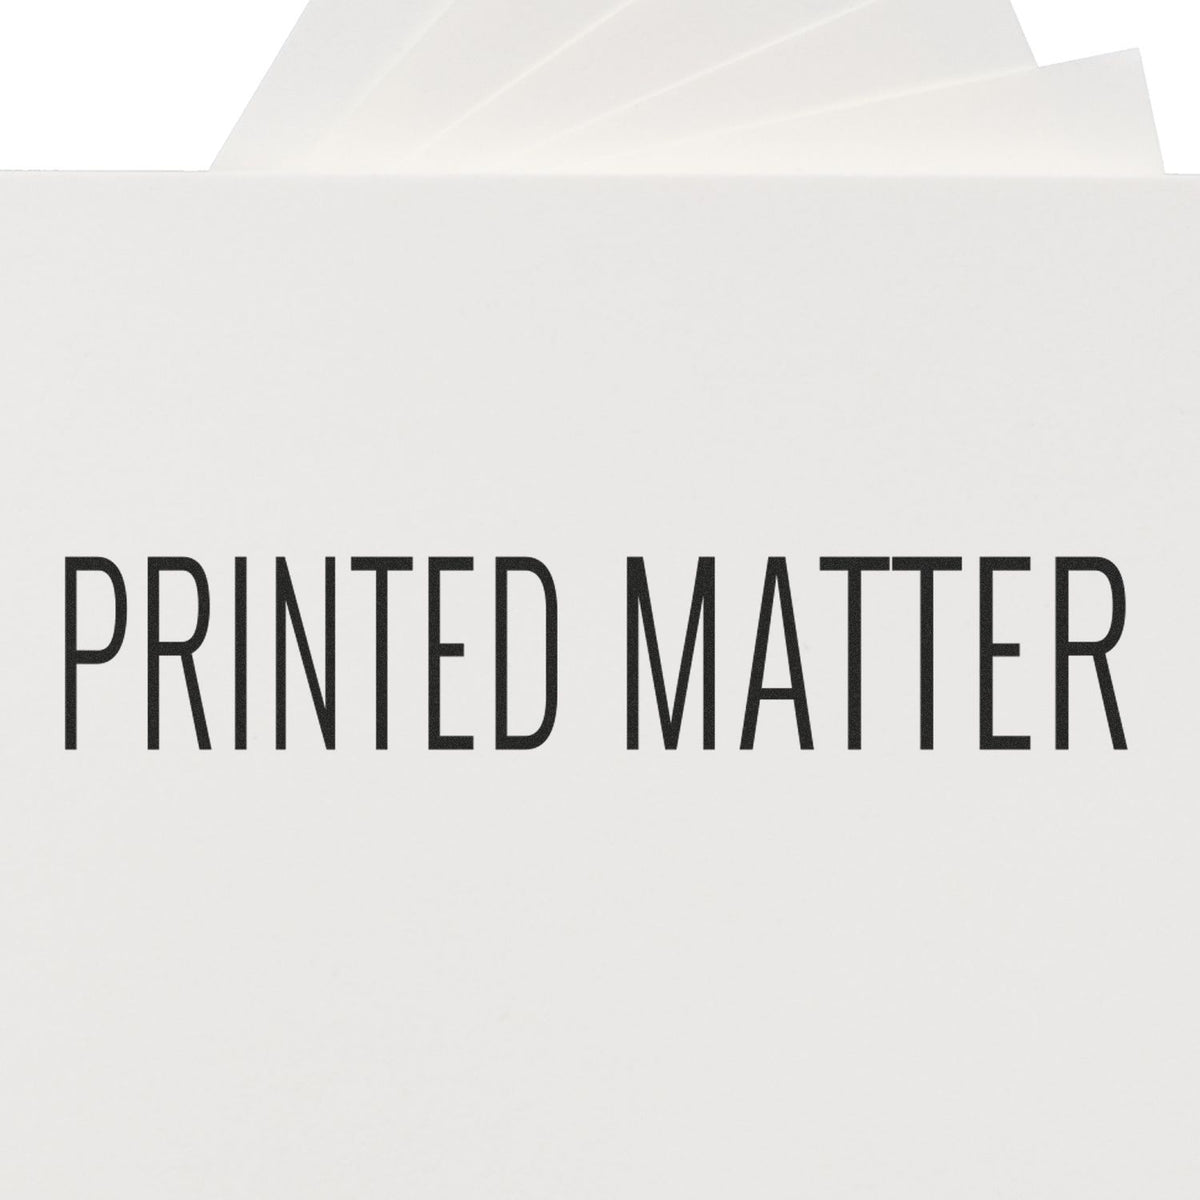 Printed Matter Rubber Stamp Lifestyle Photo